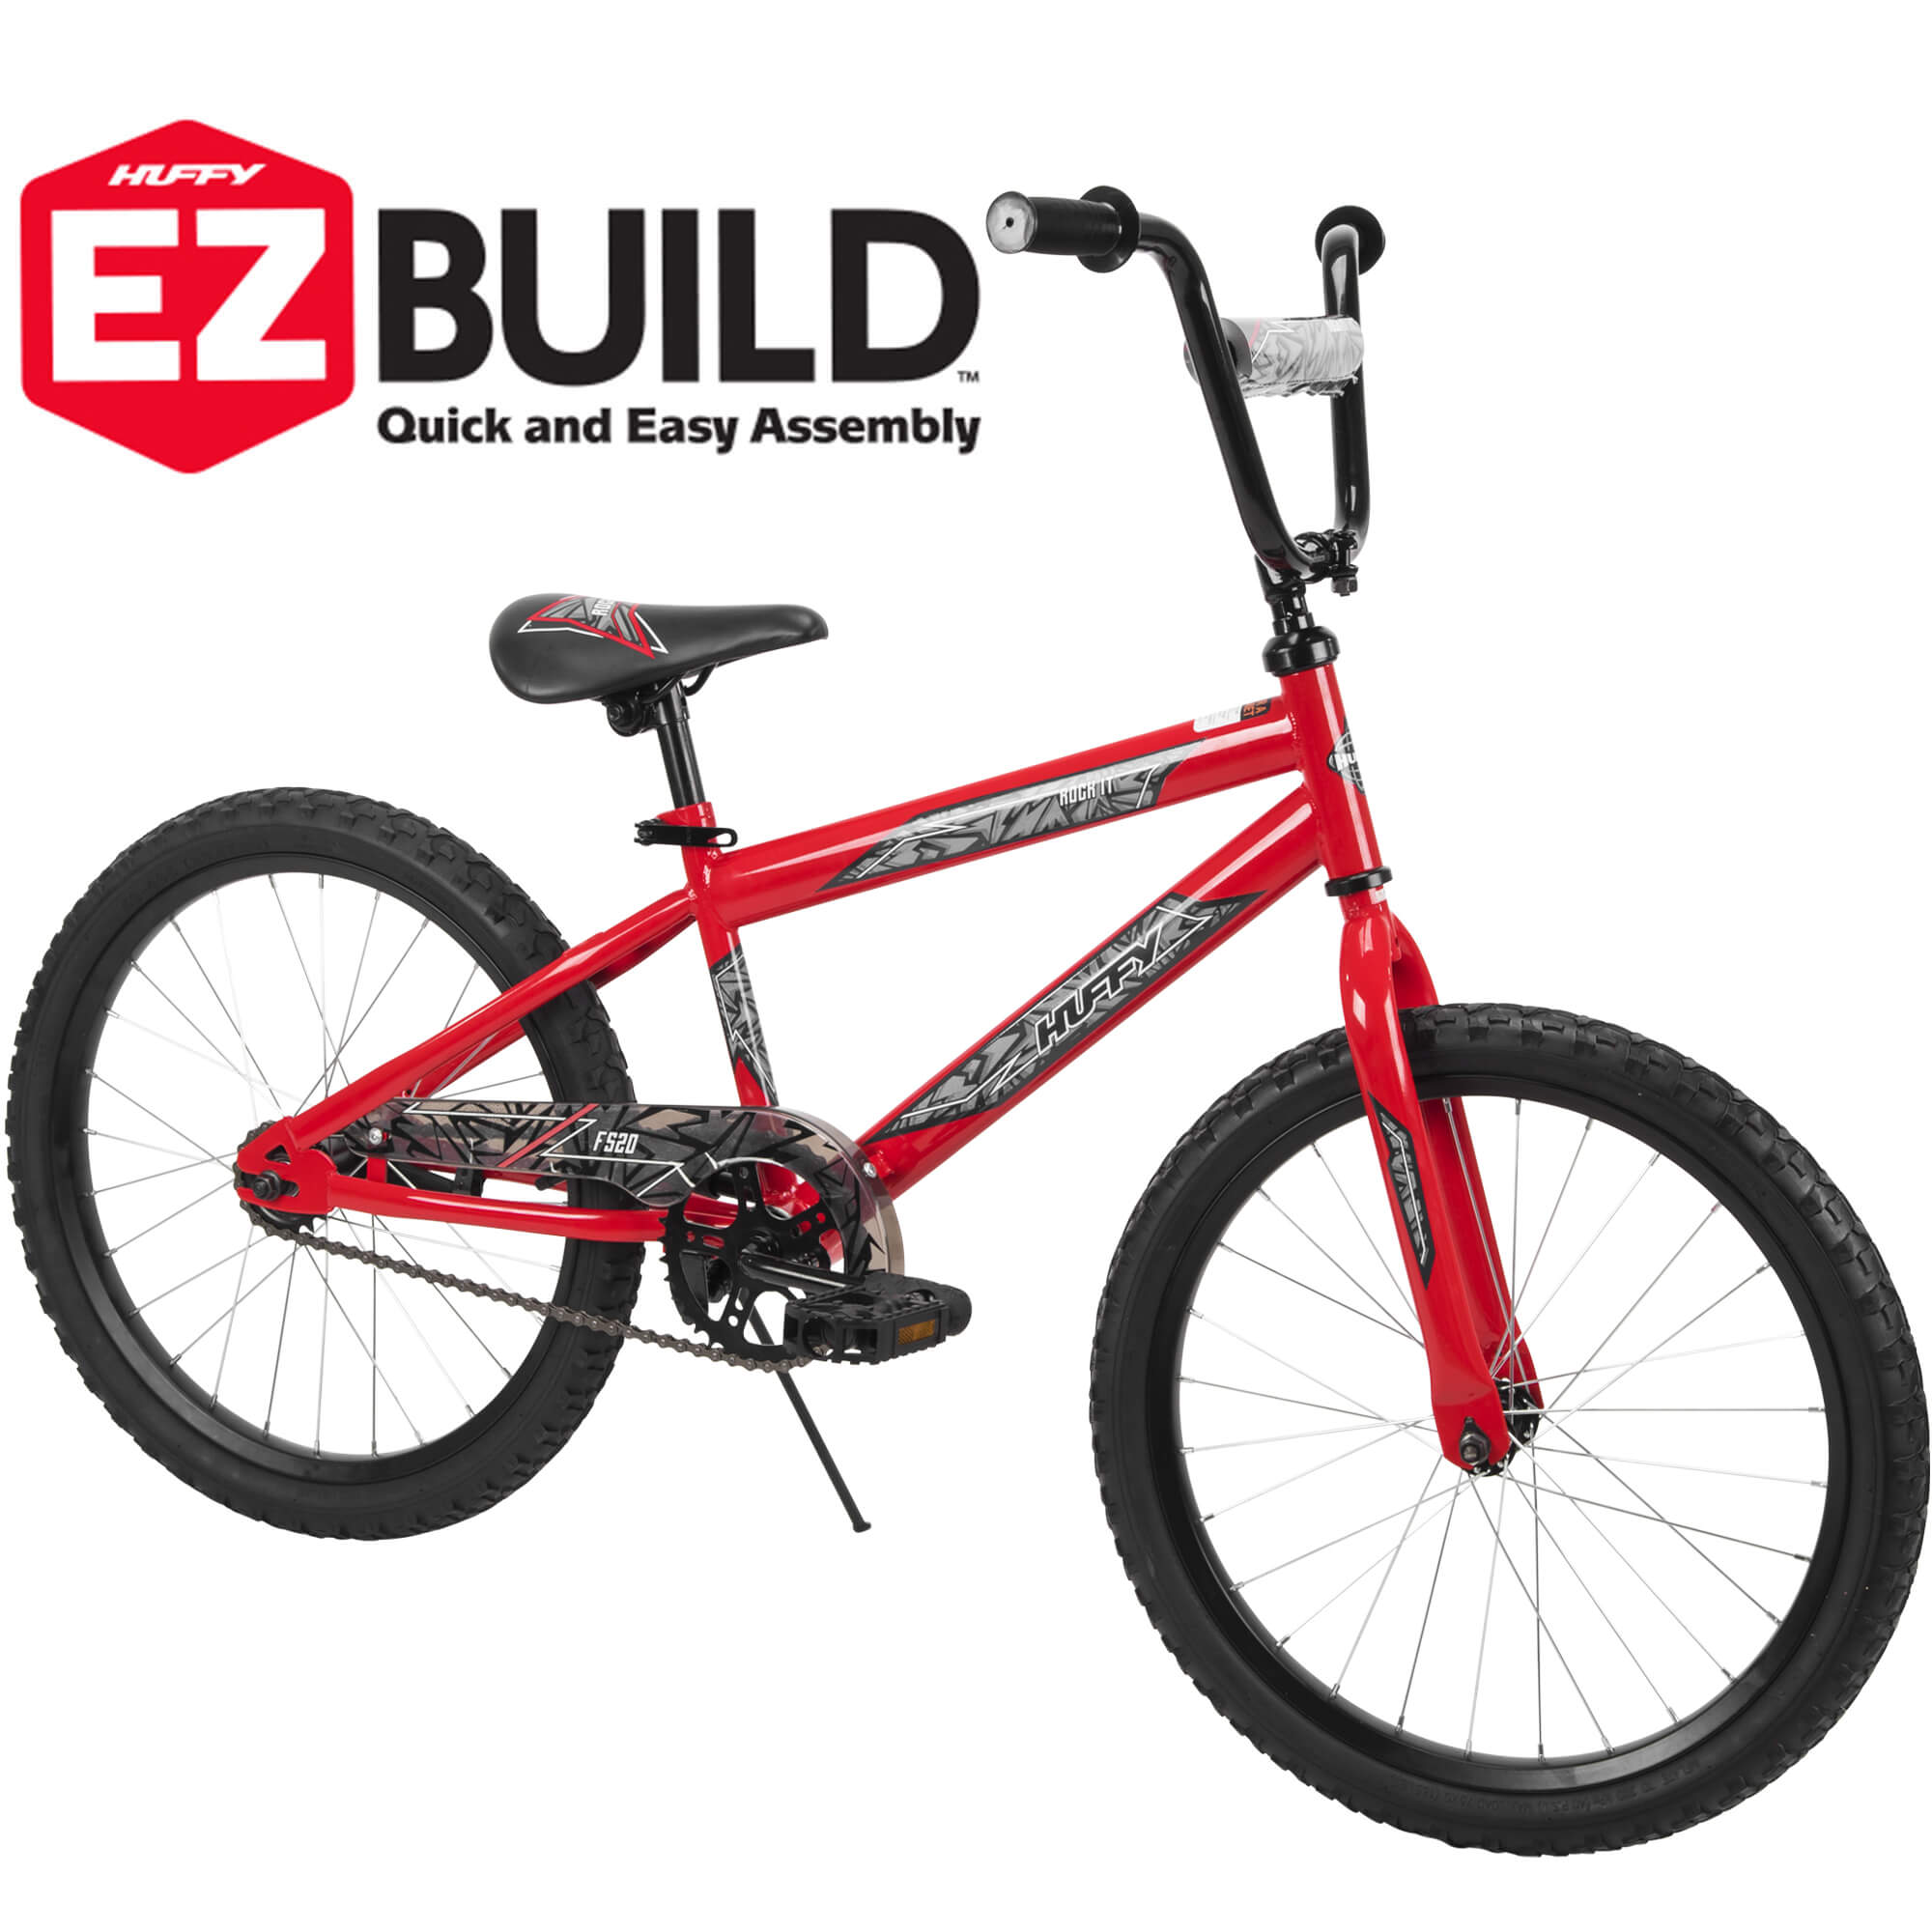 Huffy 20" Rock It EZ Build Kids Bike for Boys, Red - image 1 of 6